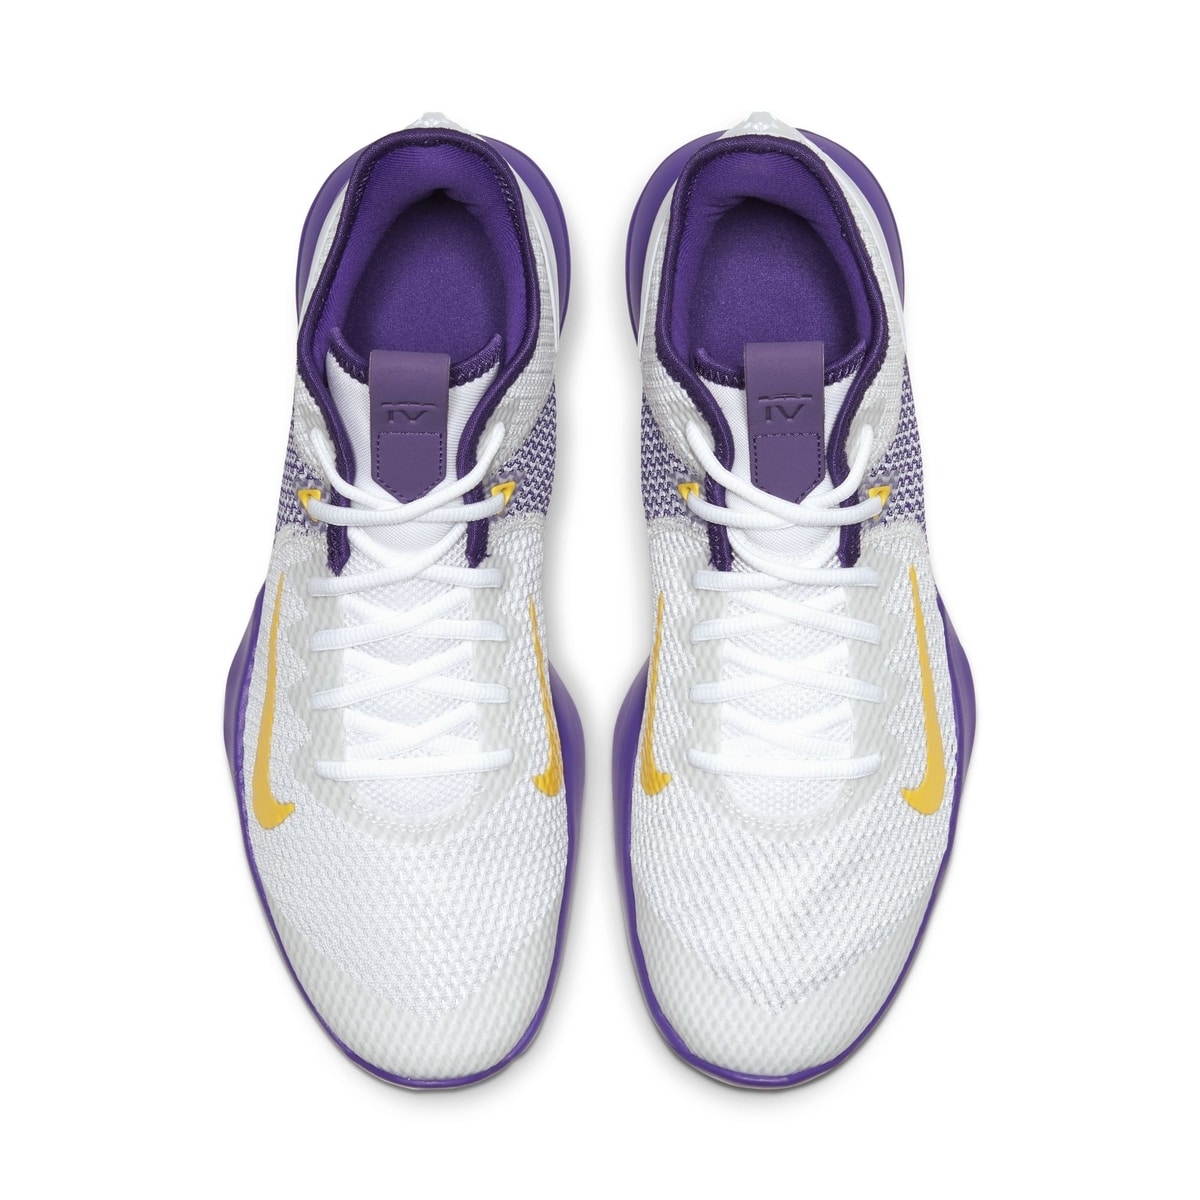 lebron lakers colorway